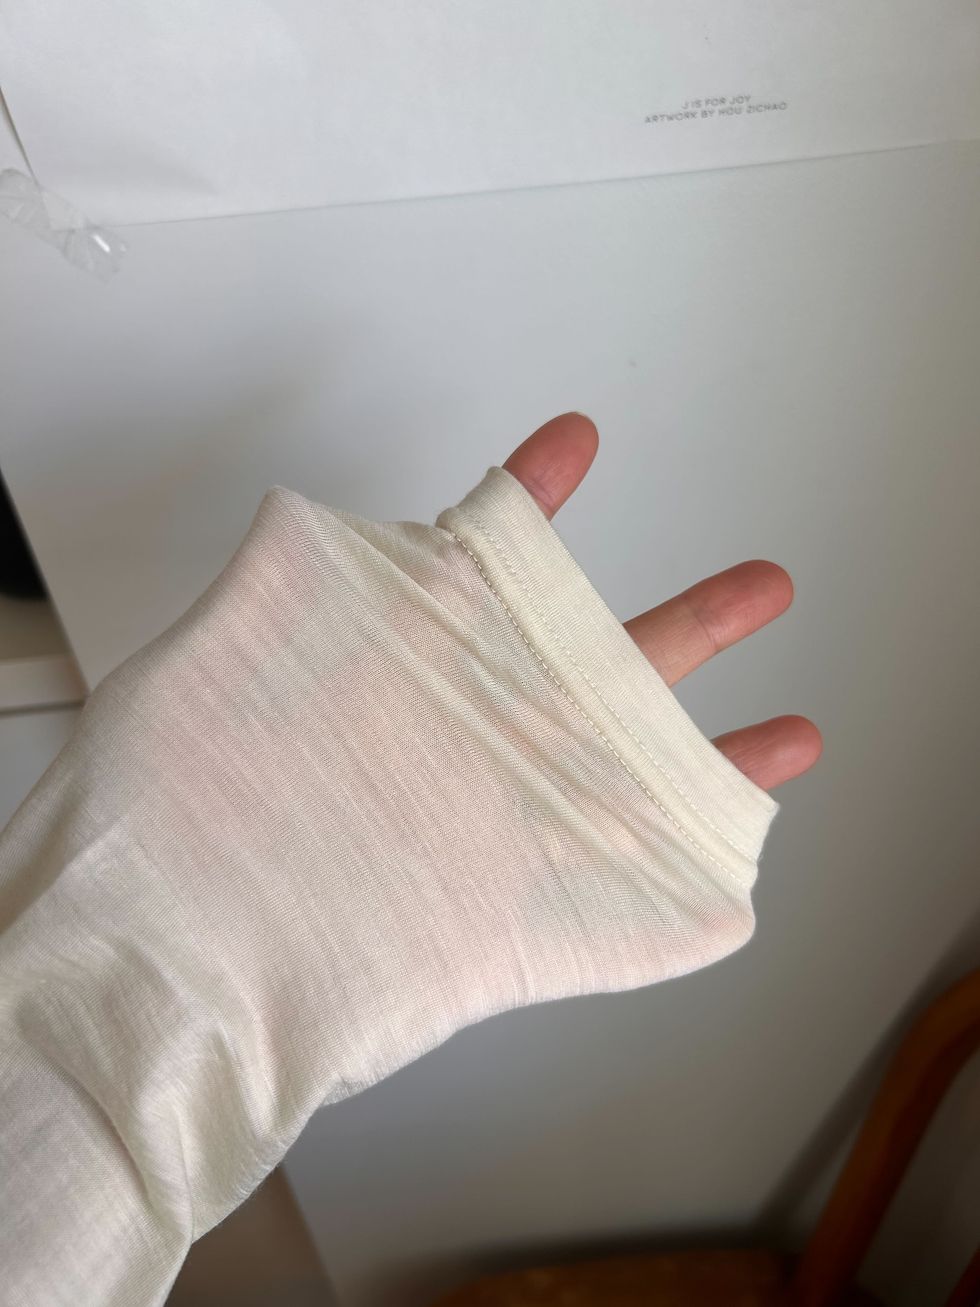 a hand with a white towel